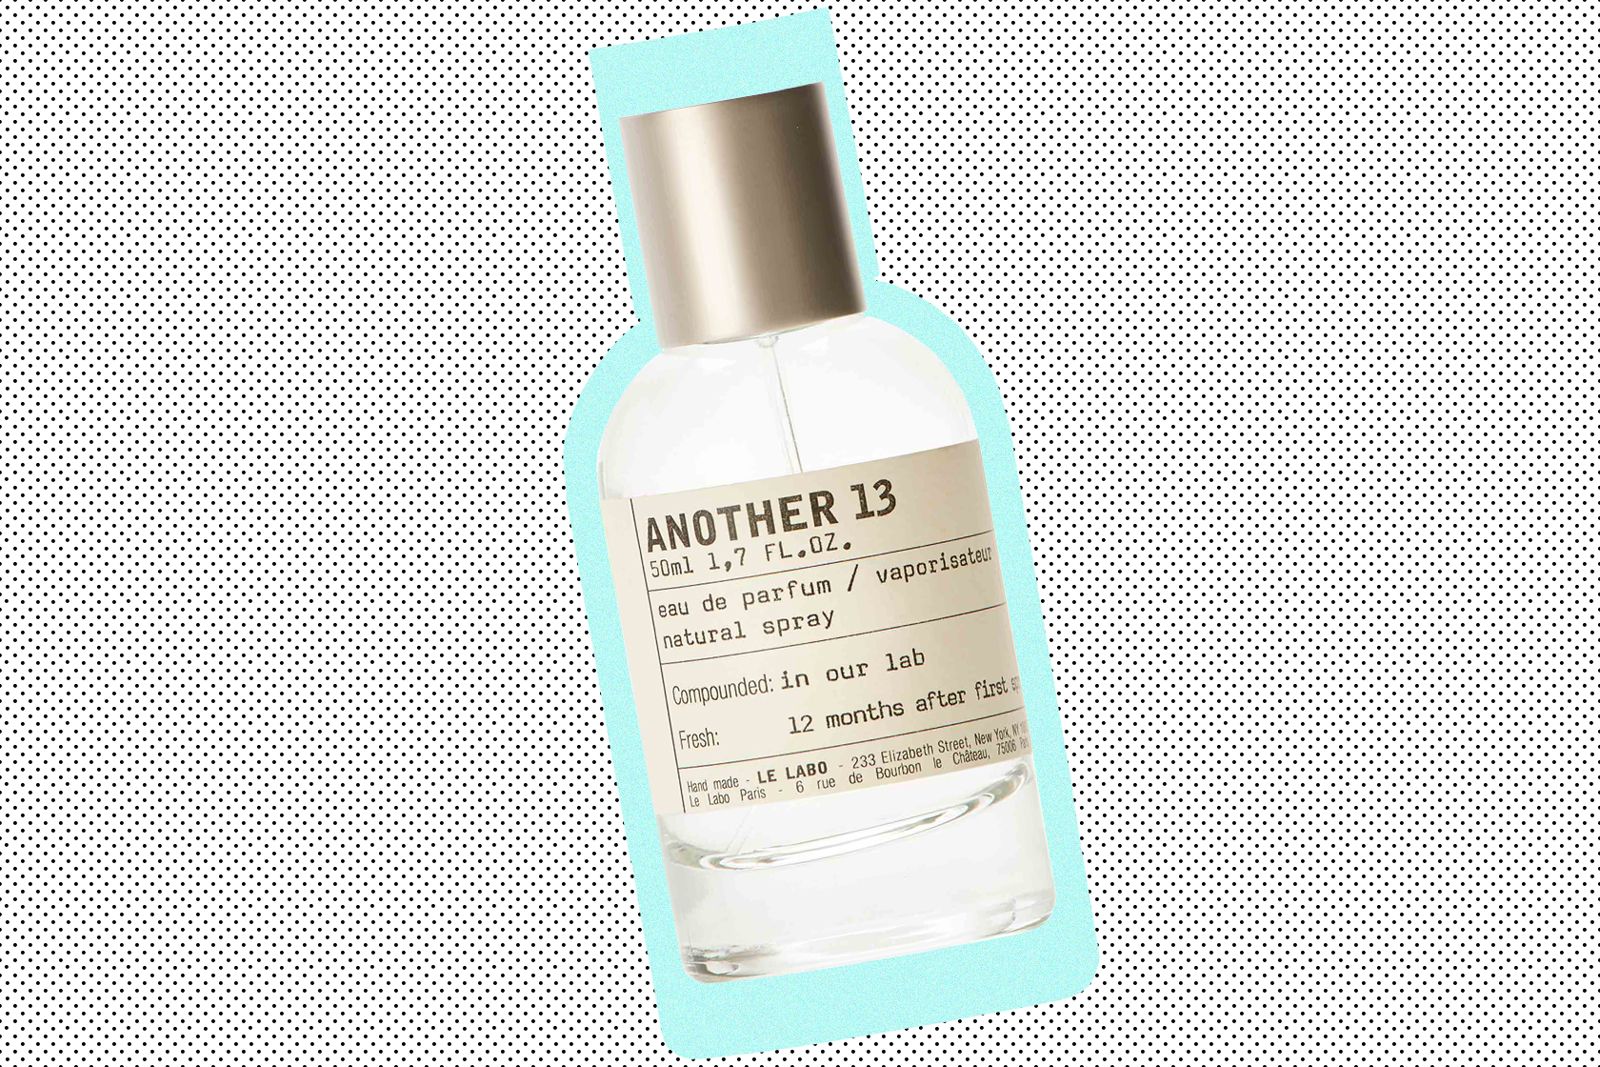 Another 13 купить. Сантал 13 le Labo. Le Labo another 13 100 ml. Дезодорант 50 мл NS-le Labo. Santal another 13.